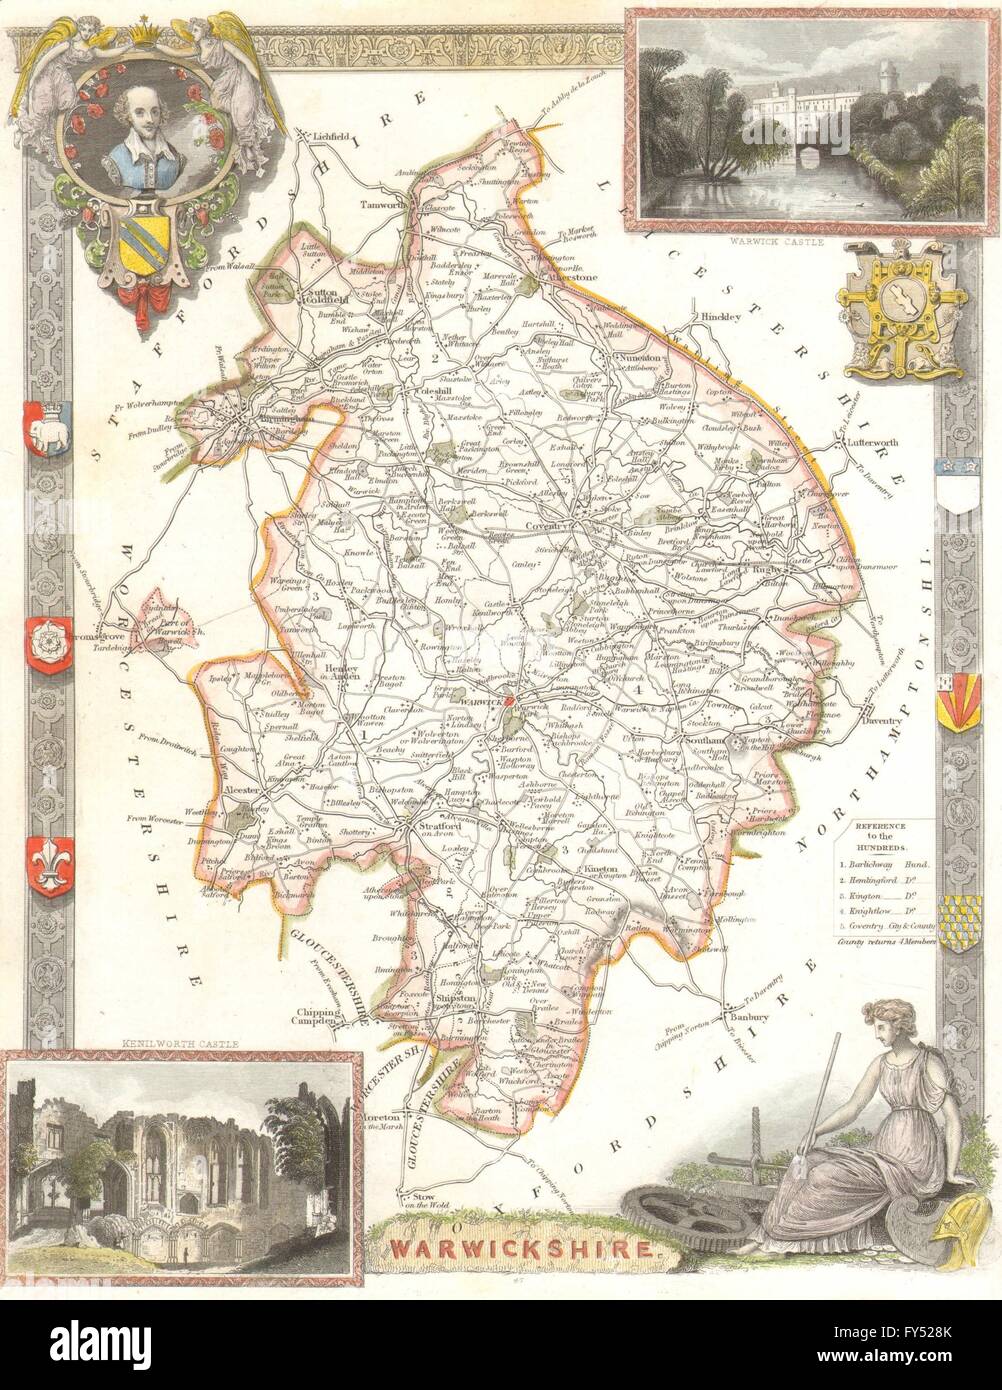 Warwickshire antique hand-coloured county map by Thomas Moule, c1840 Stock Photo